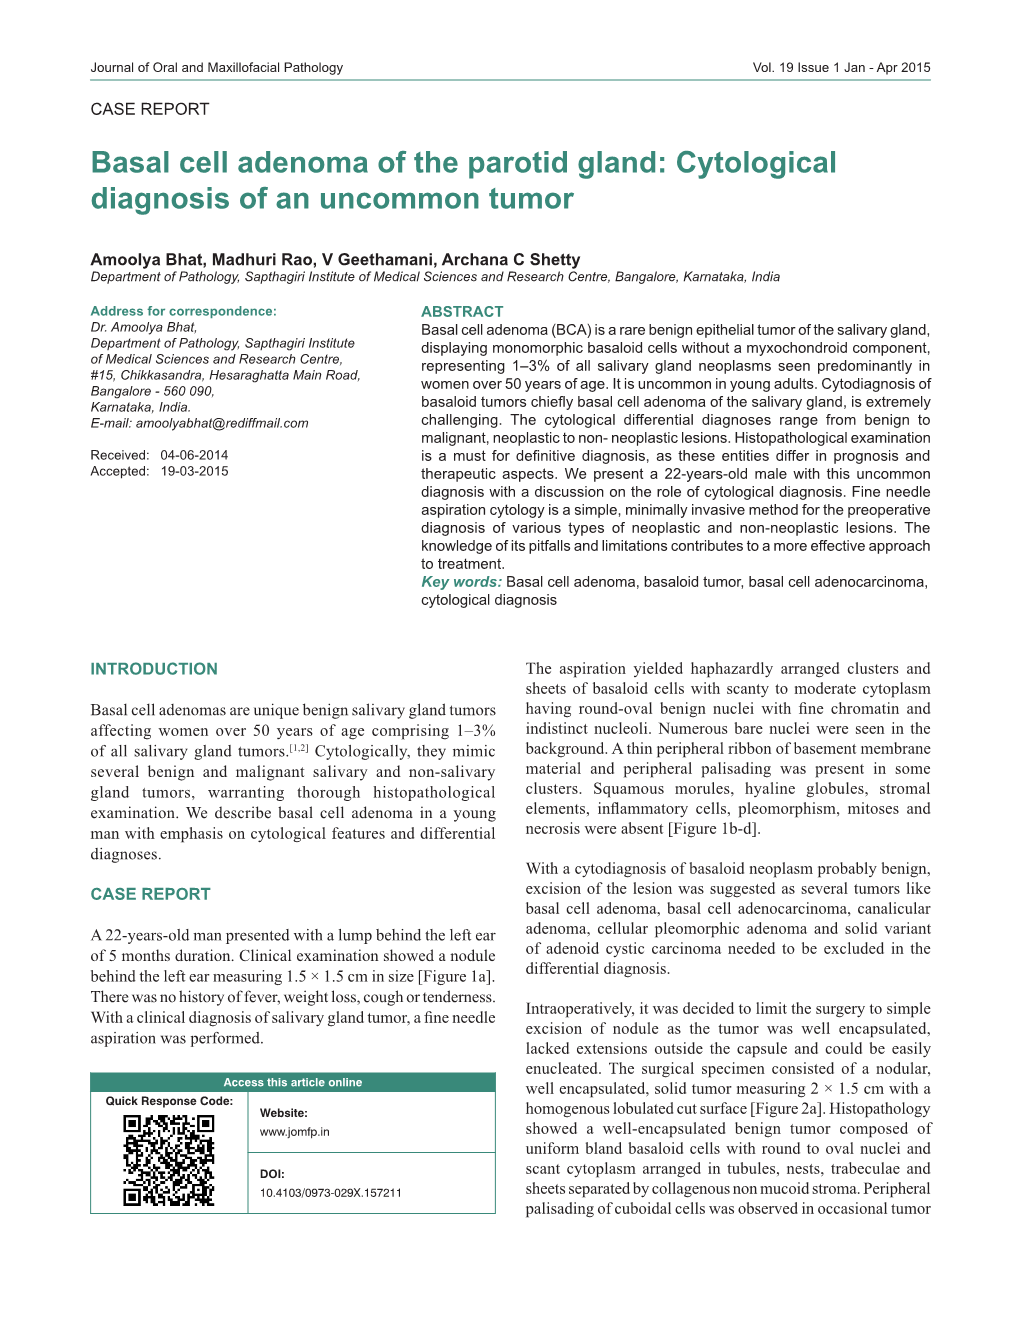 Basal Cell Adenoma of the Parotid Gland: Cytological Diagnosis of an Uncommon Tumor